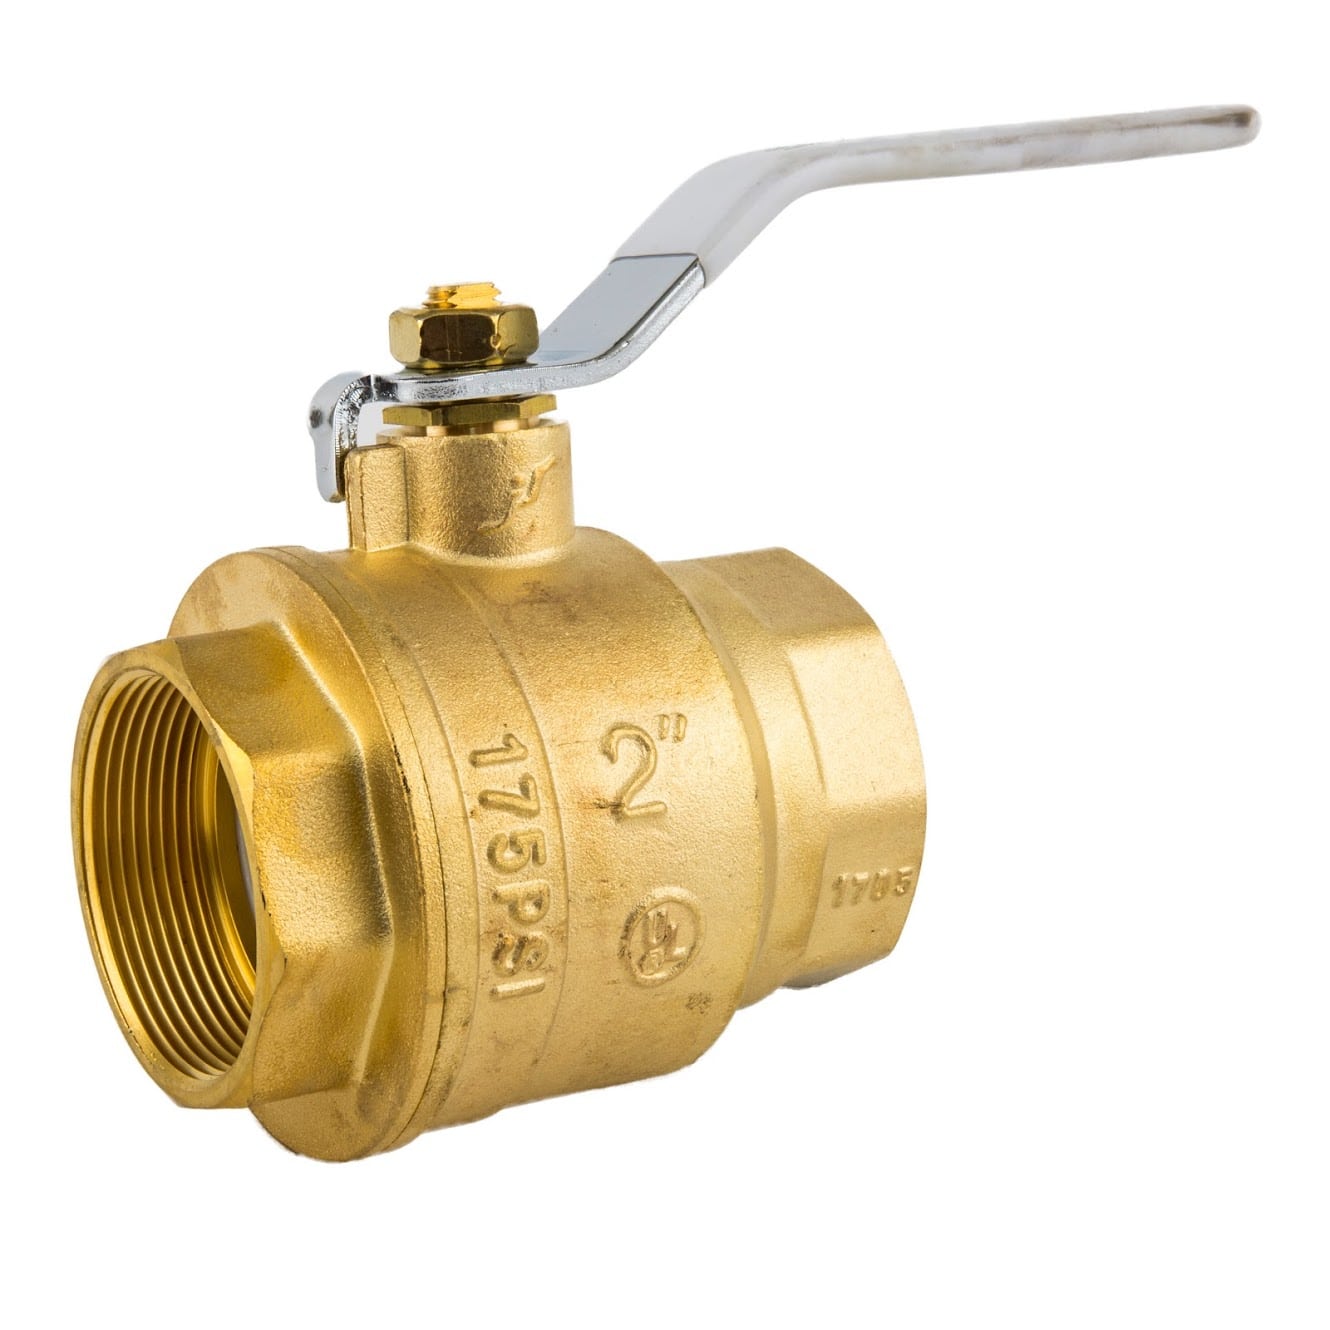 2-inch Full Port Brass Ball Valve - Landscape Products Inc.